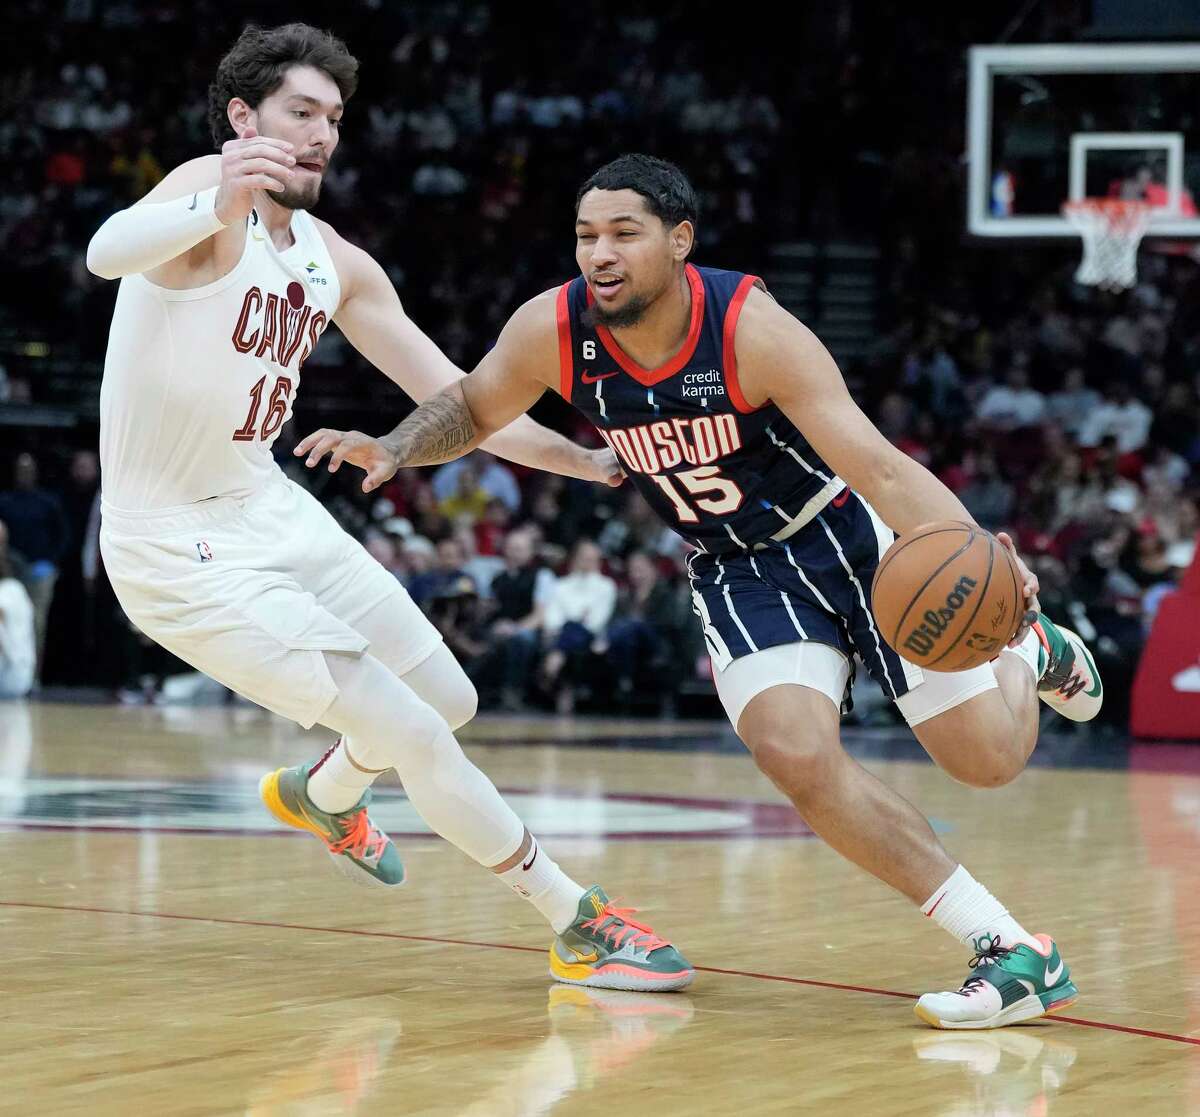 Houston Rockets guard Daishen Nix (15) works against Cleveland Cavaliers forward Cedi Osman (16) during the first half of a NBA basketball game at Toyota Center on Thursday, Jan. 26, 2023 in Houston.